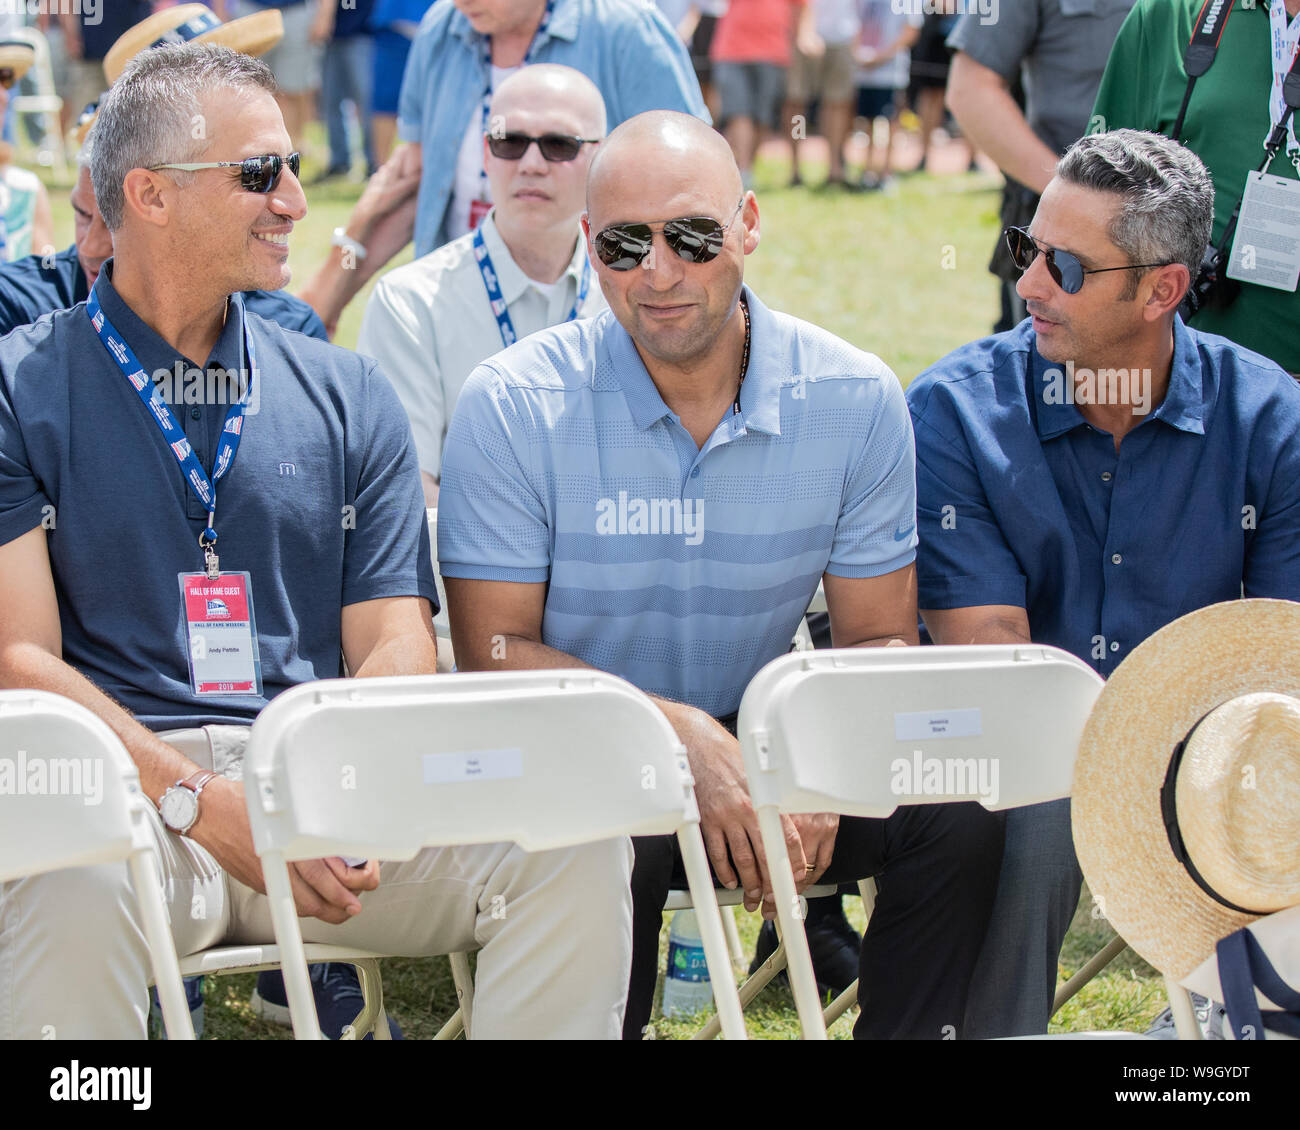 Derek Jeter and Yankees come to Cooperstown to cheer on the inductions to the Hall of Fame(including former teammates - Mariano Rivera & Mike Mussina) Stock Photo